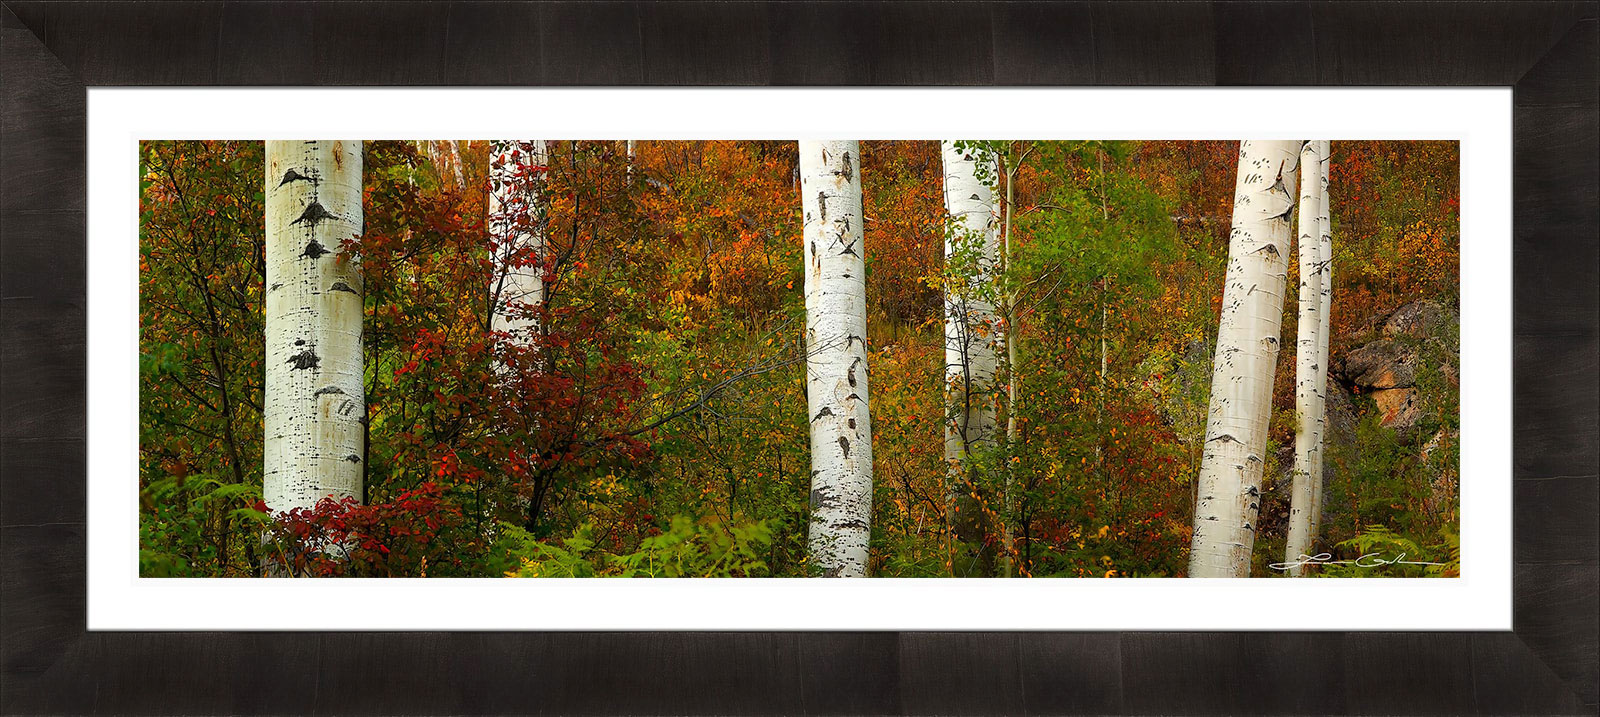 A framed print of white aspen tree trunks and colorful fall foliage